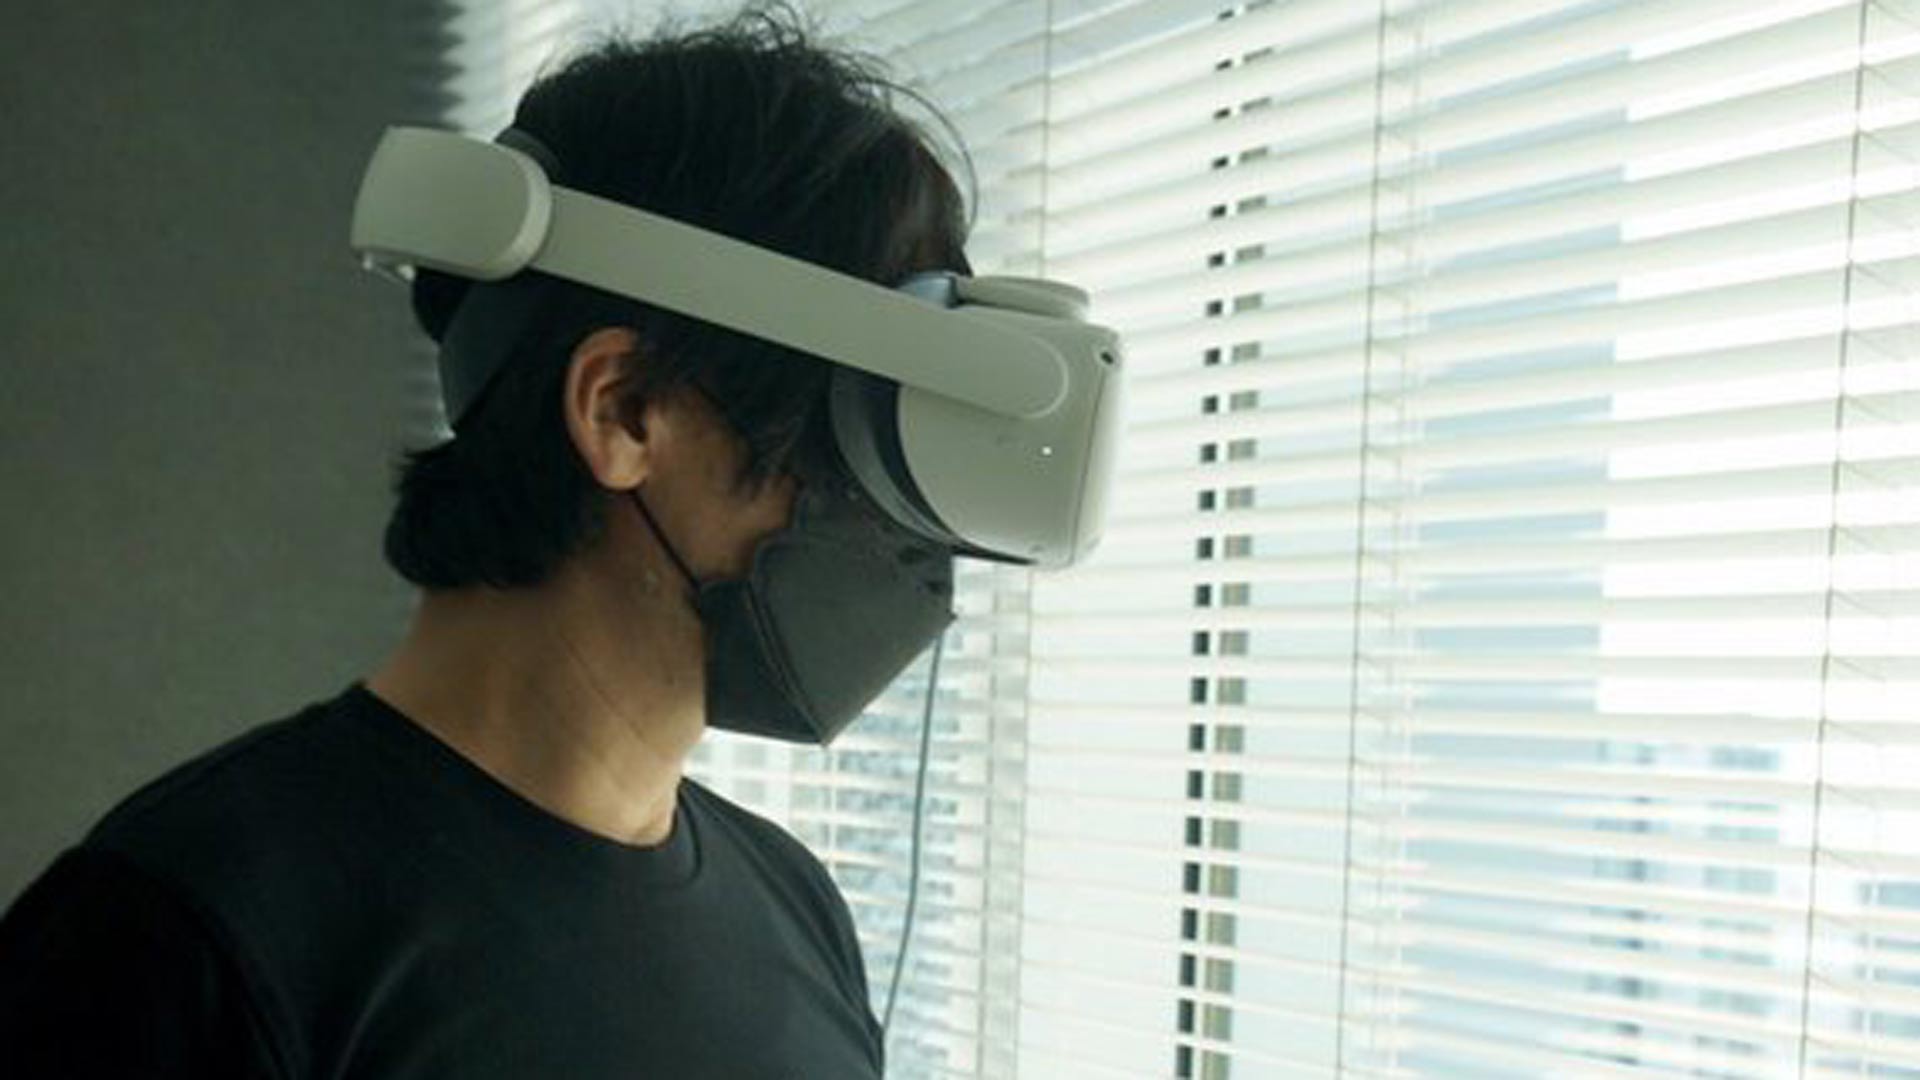 ‘Metal Gear Solid’ Creator Teases Interest in VR with Virtual Booth at TGS – Road to VR